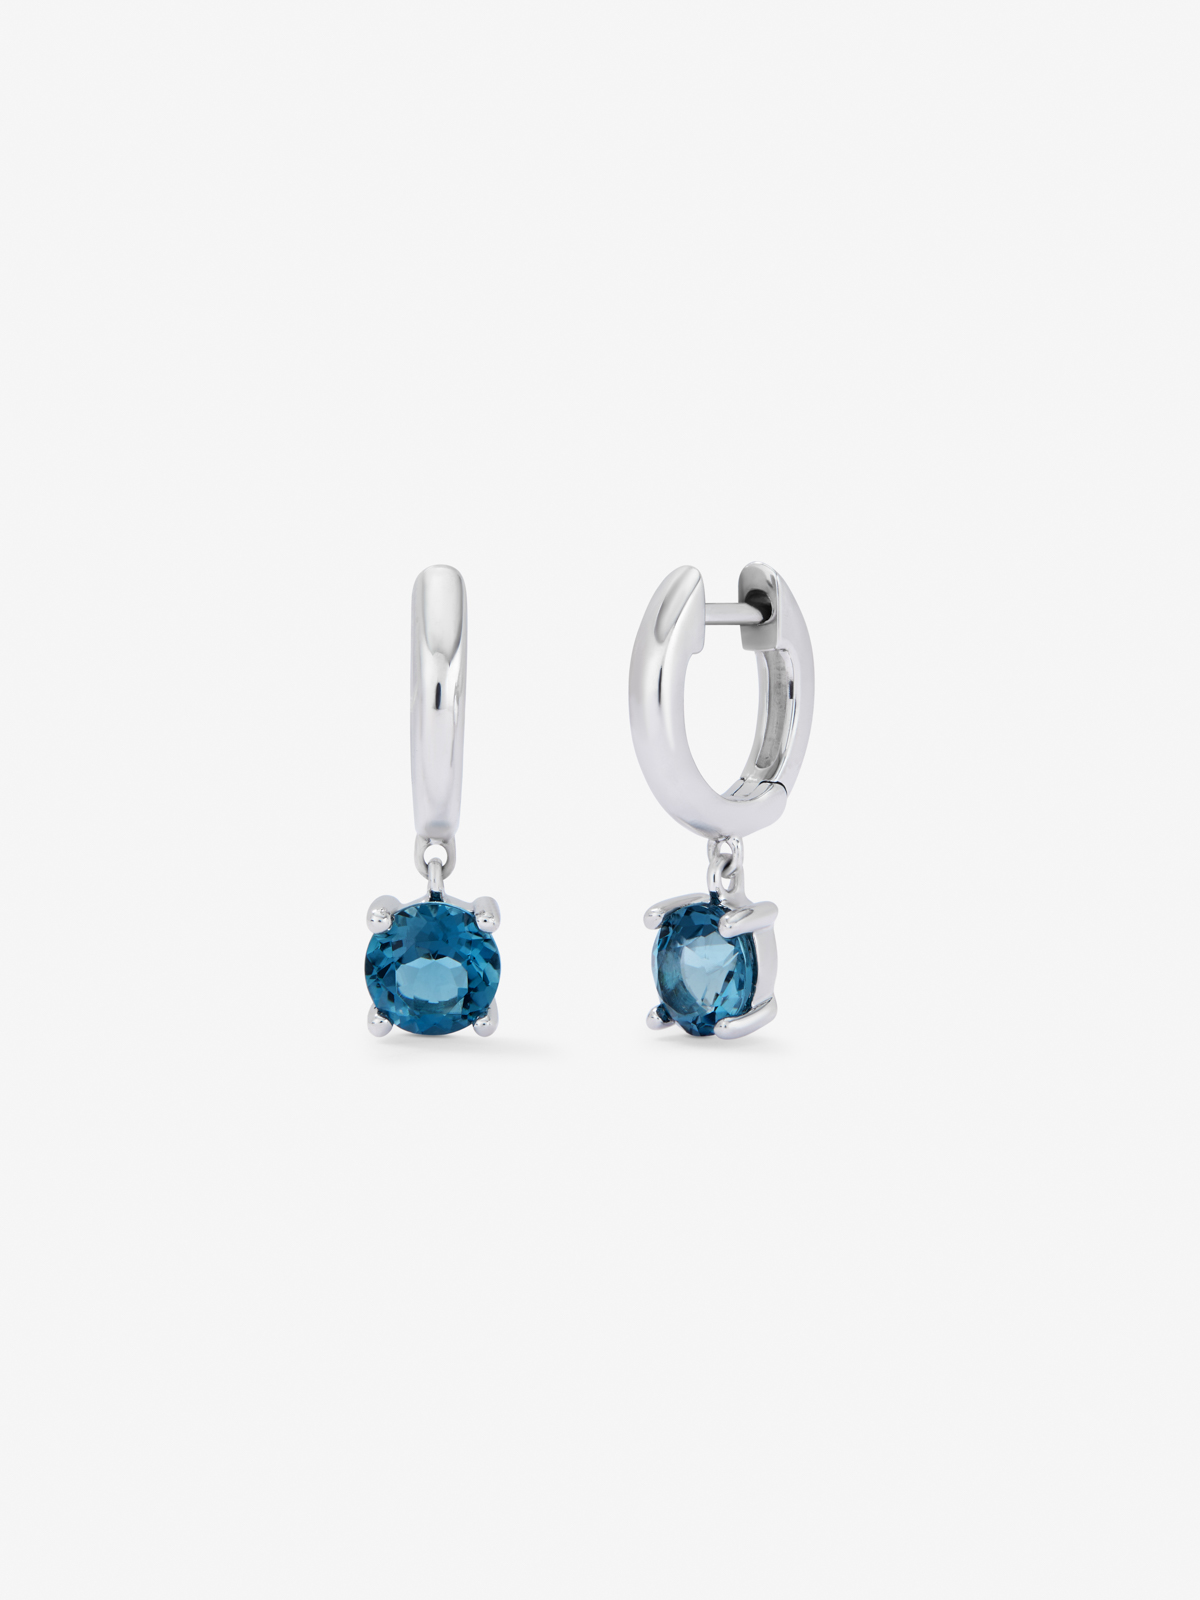 925 silver earrings with Blue London Topacios in 1.4 cts bright size